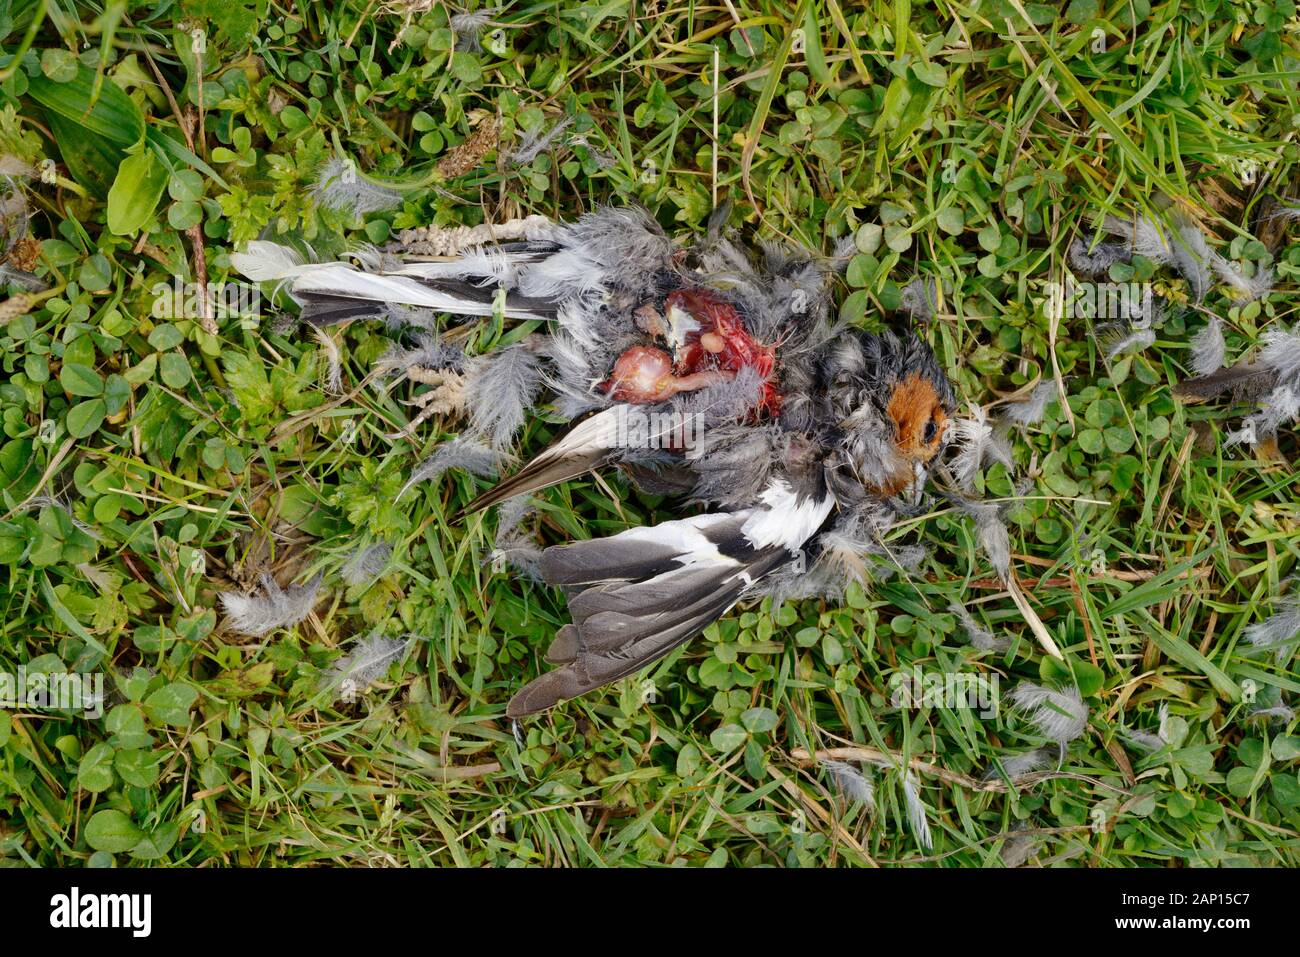 Fringilla coelebs, male Chaffinch, plucked and eviscerated by a predator, Wales, UK. Stock Photo